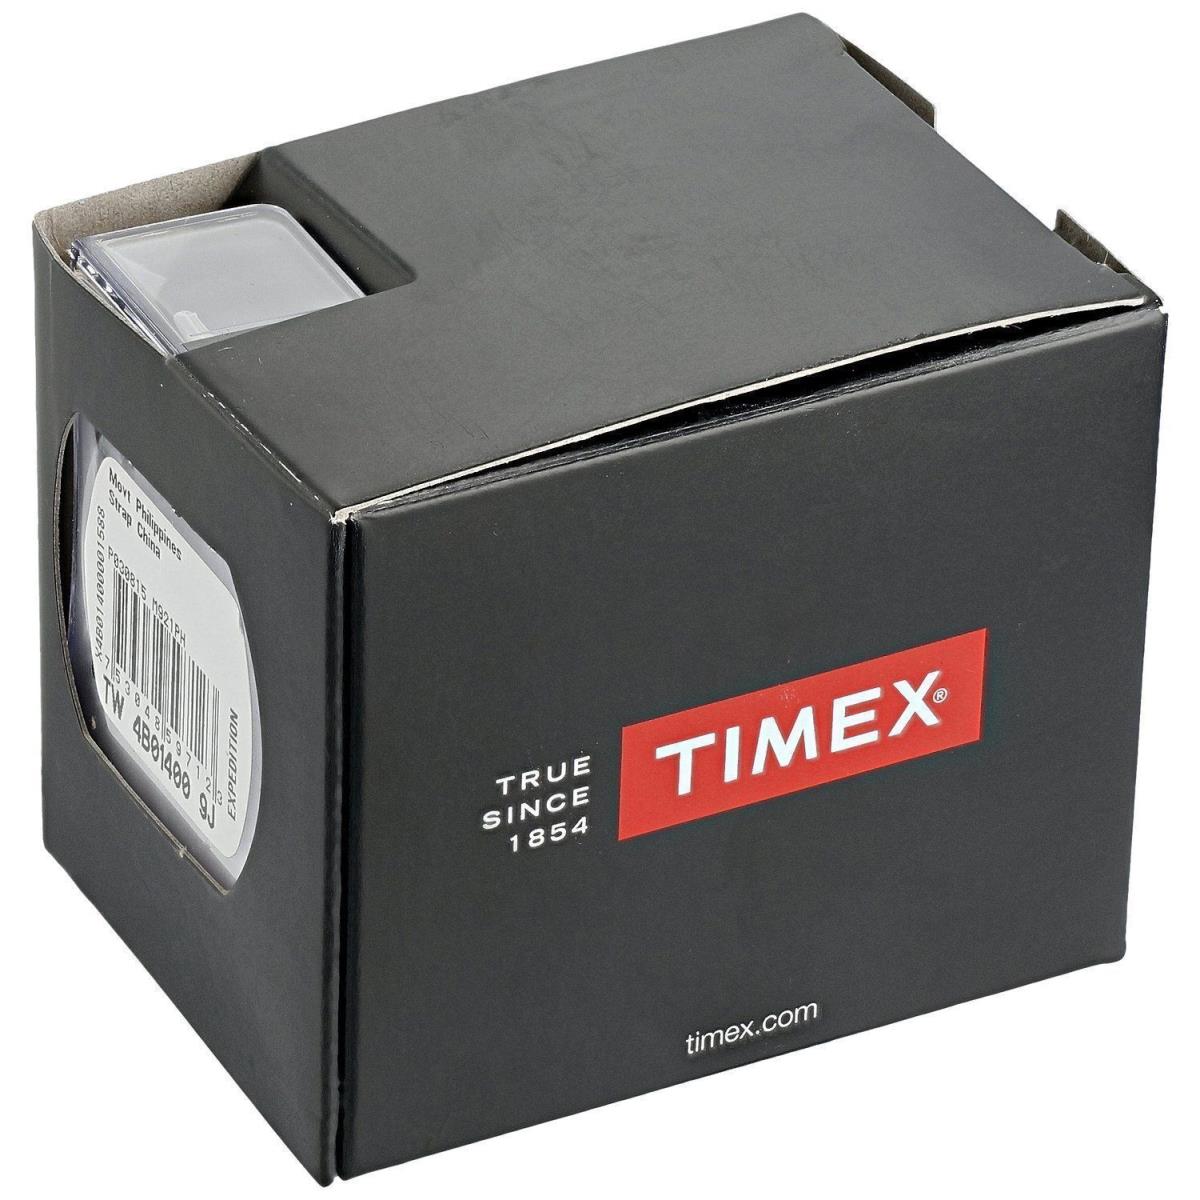 Timex T40091 Men`s Expedition Brown Leather/nylon Watch Indiglo Date - Dial: Black, Band: Black, Bezel: Silver